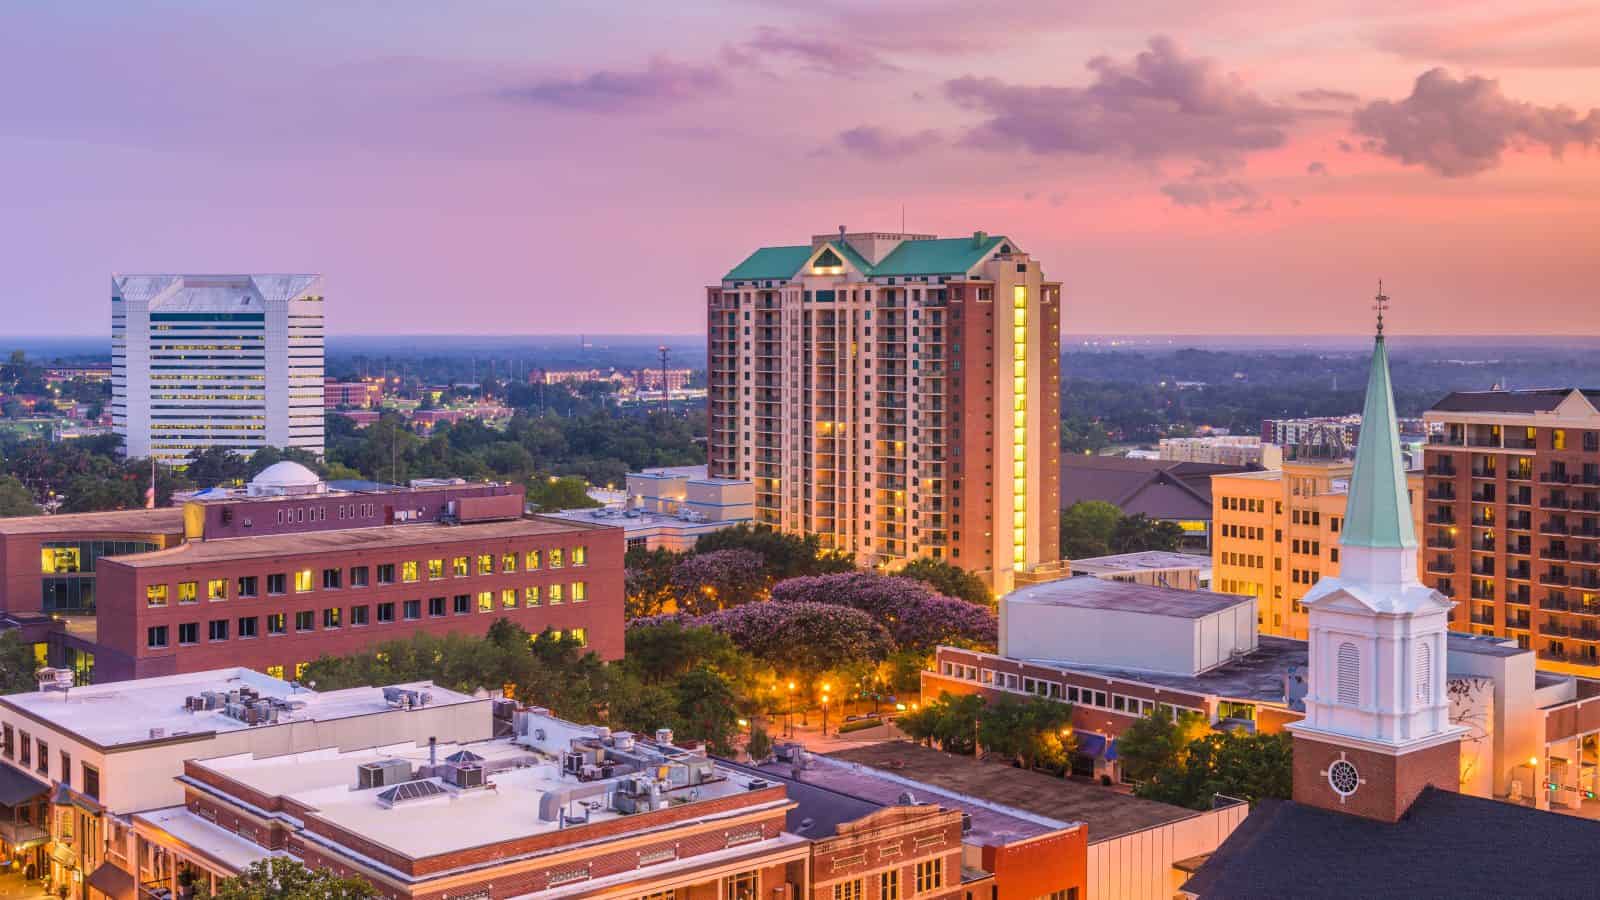 The downtown Tallahassee Skyline at dusk.